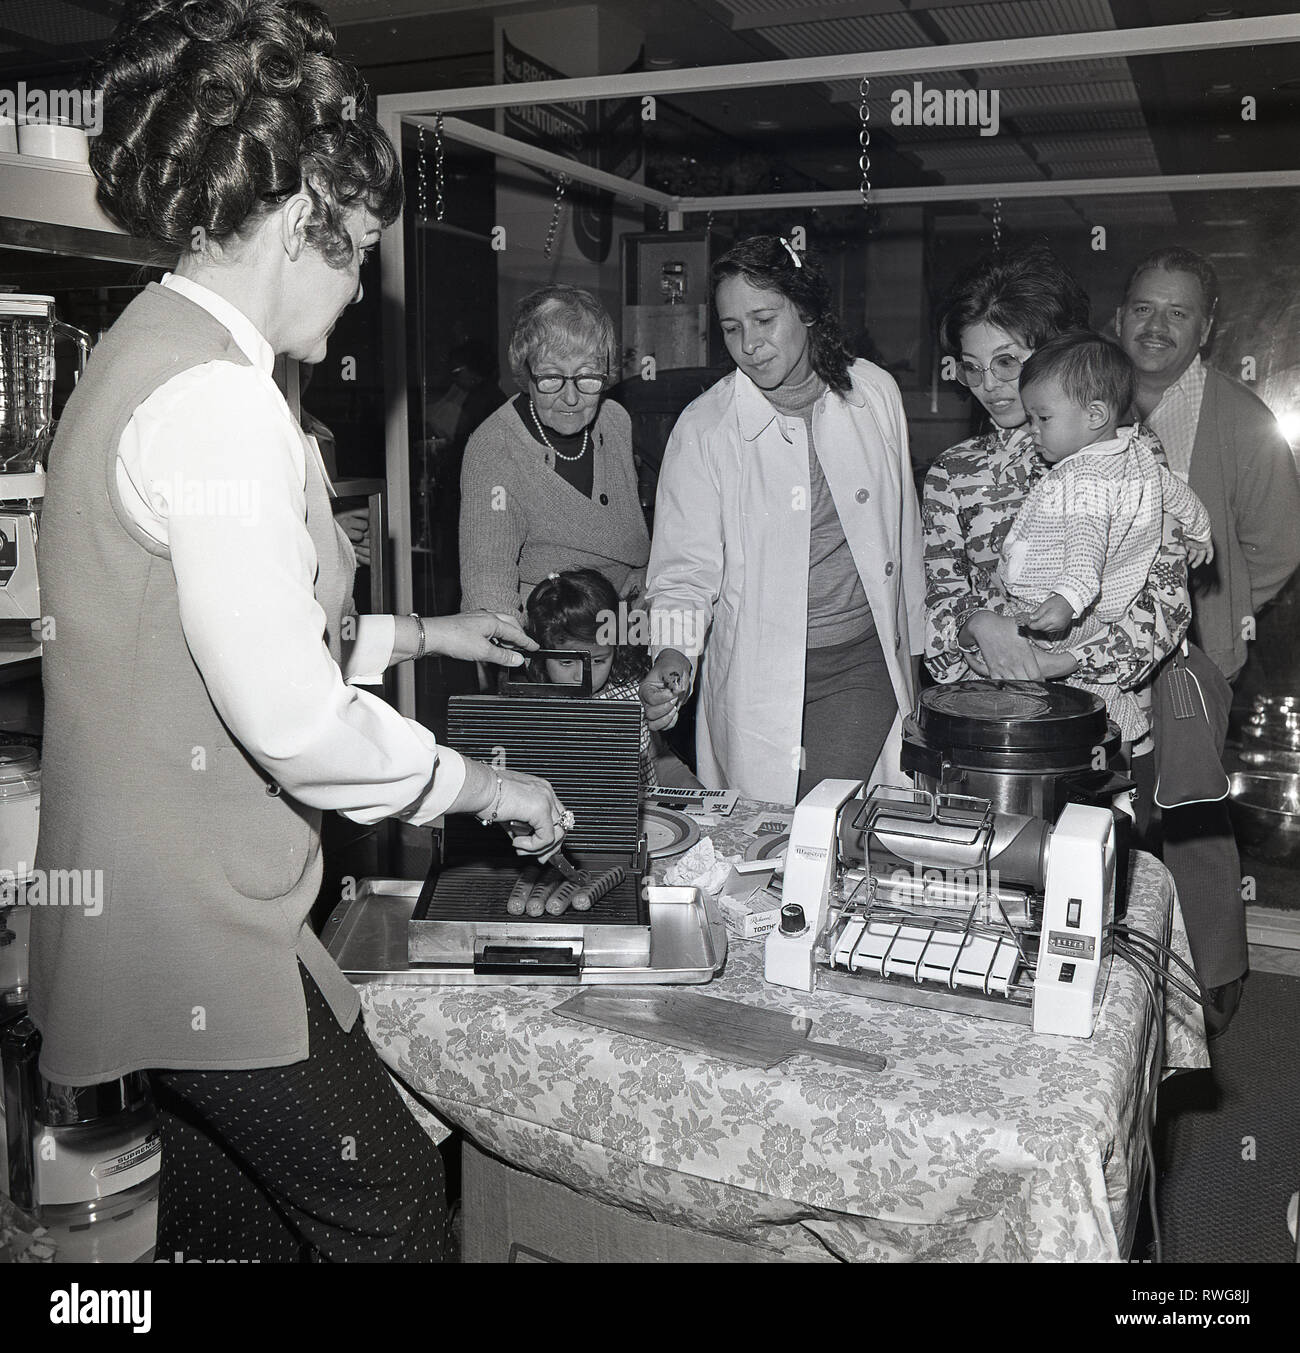 1970s, in-store, kitchen appliance demo, a lady demonstrating to potential customers how to cook food, 'hotdogs' quickly on a new 'minute grill', Los Angles, USA. Stock Photo